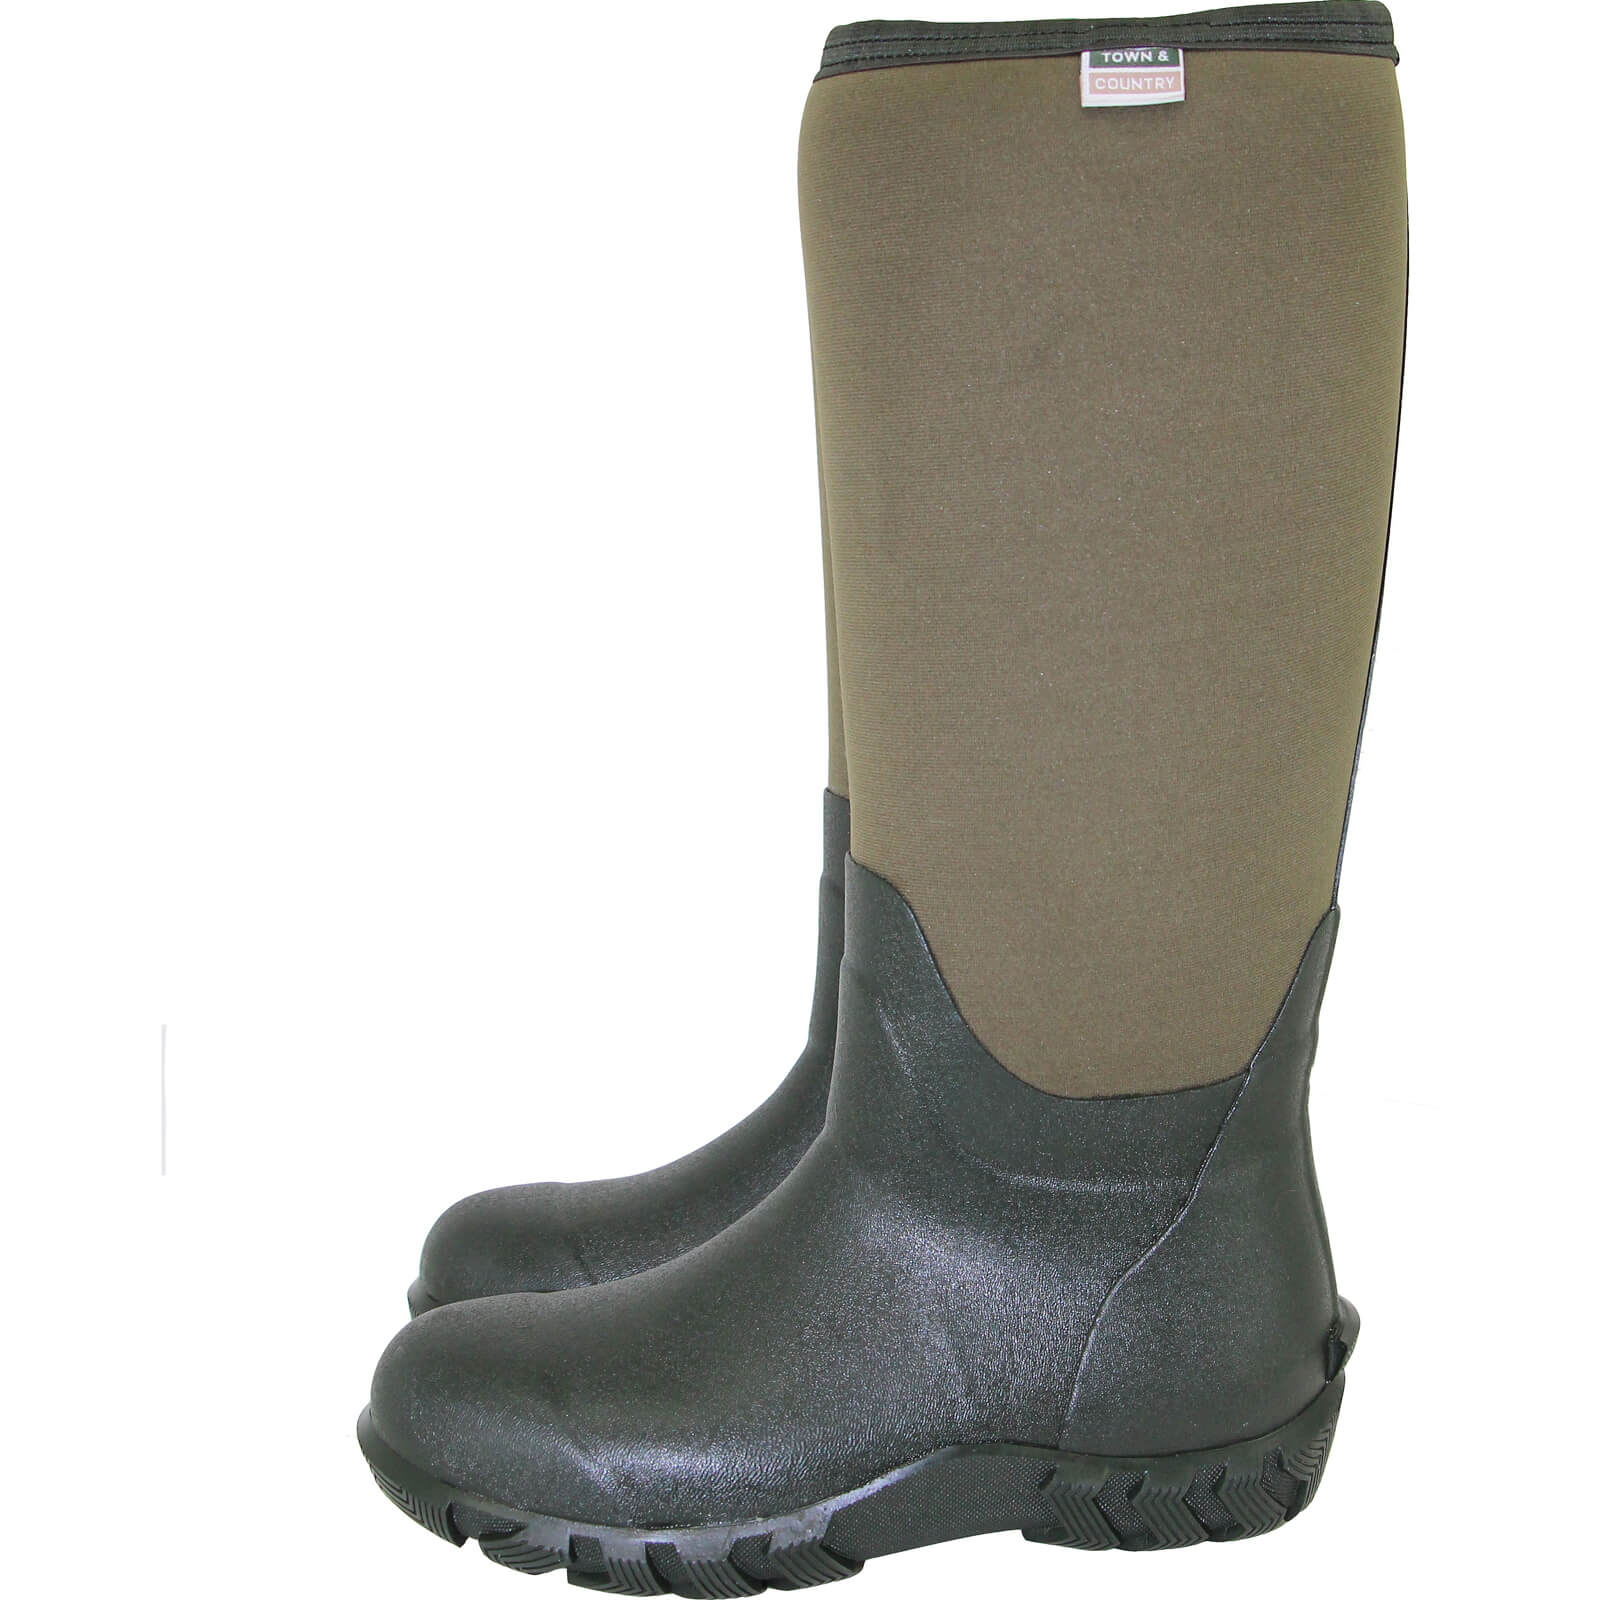 Image of Town and Country Buckingham Rubber Wellington Boots Green Size 11